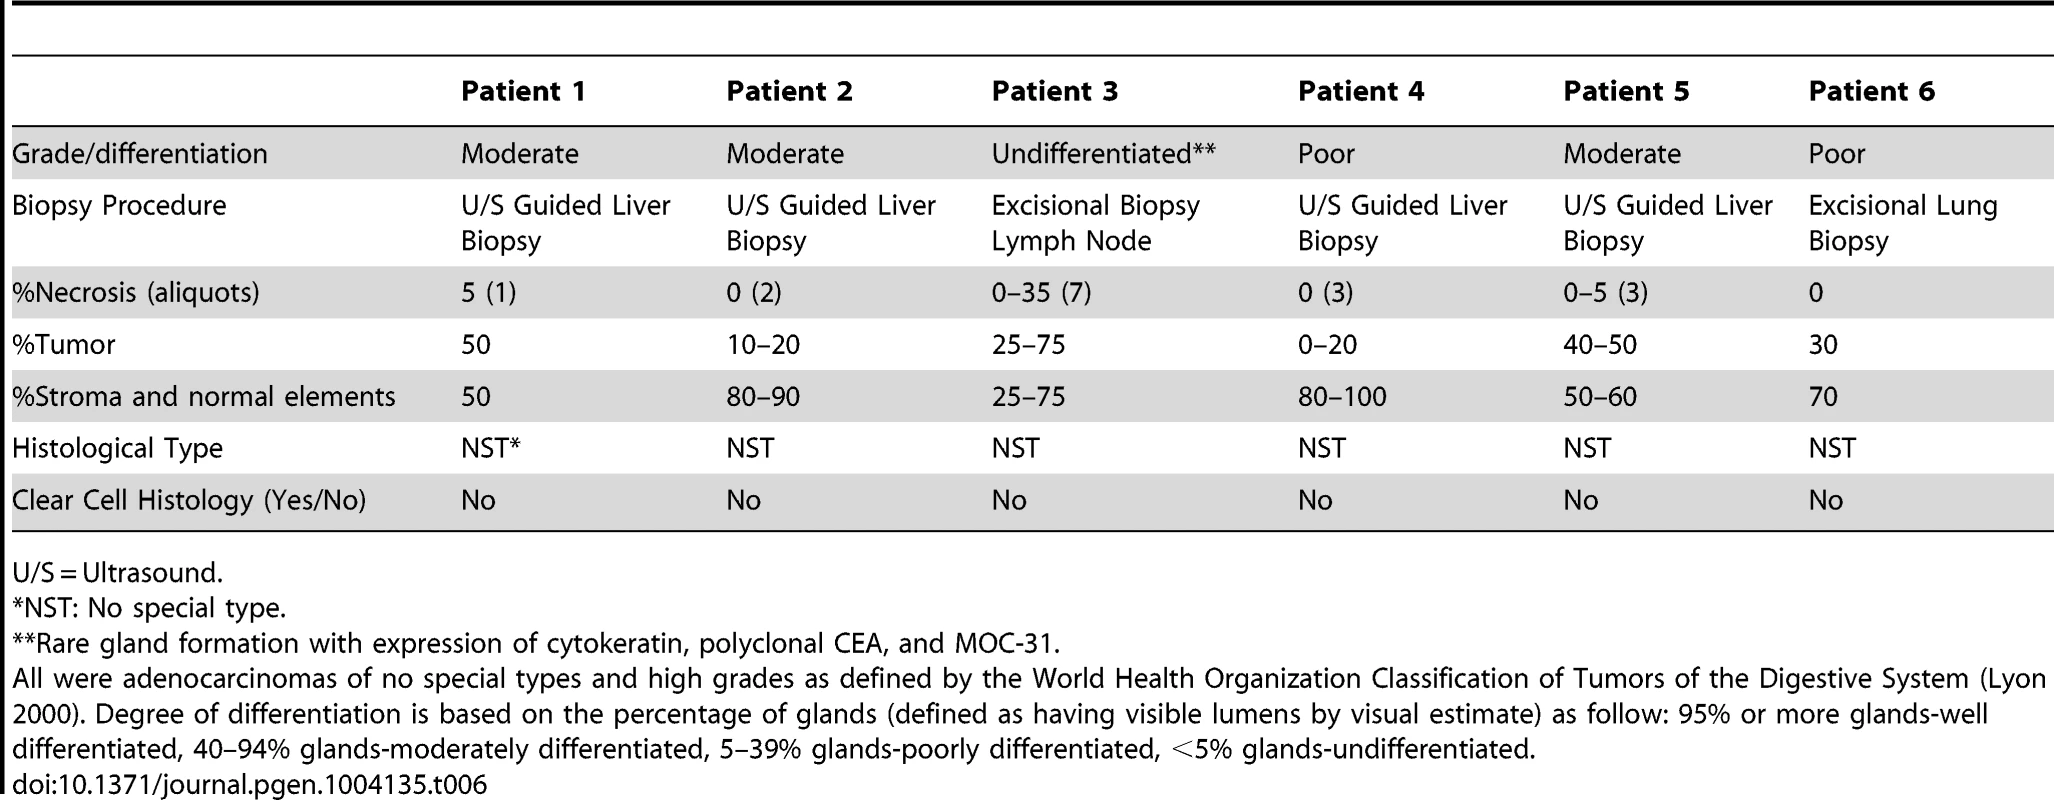 Pathological characteristics of 6 advanced, sporadic biliary tract cancer patients.